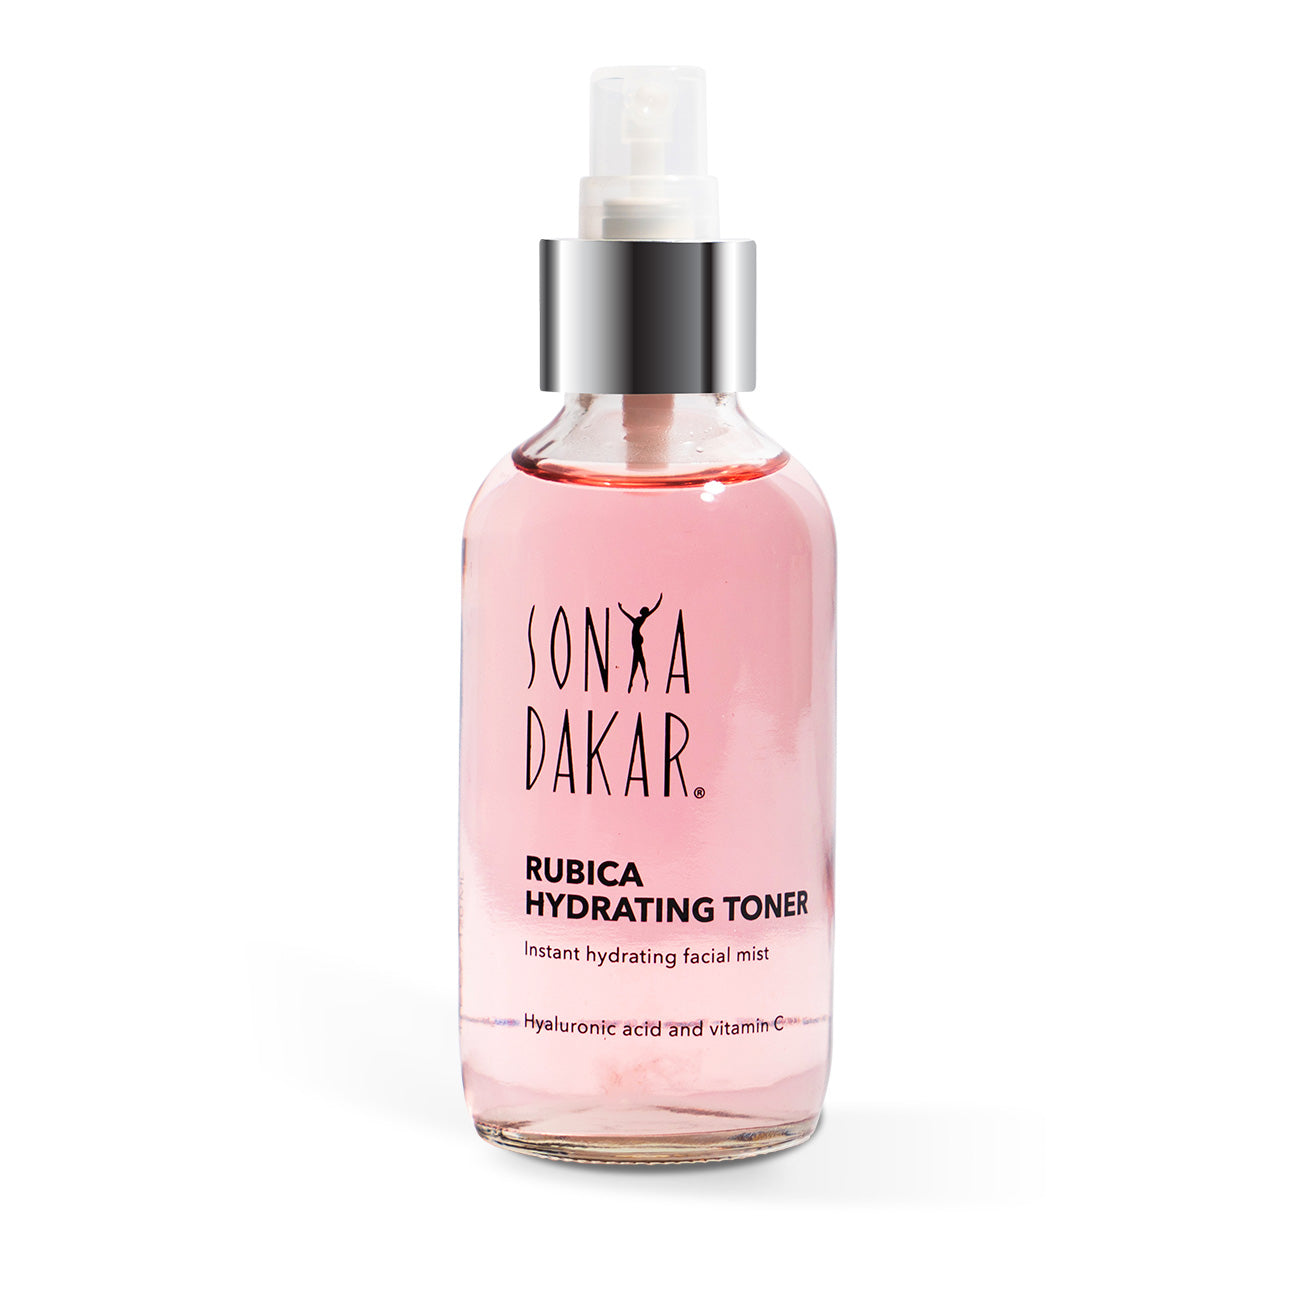 Rose Instant Hydration Mist